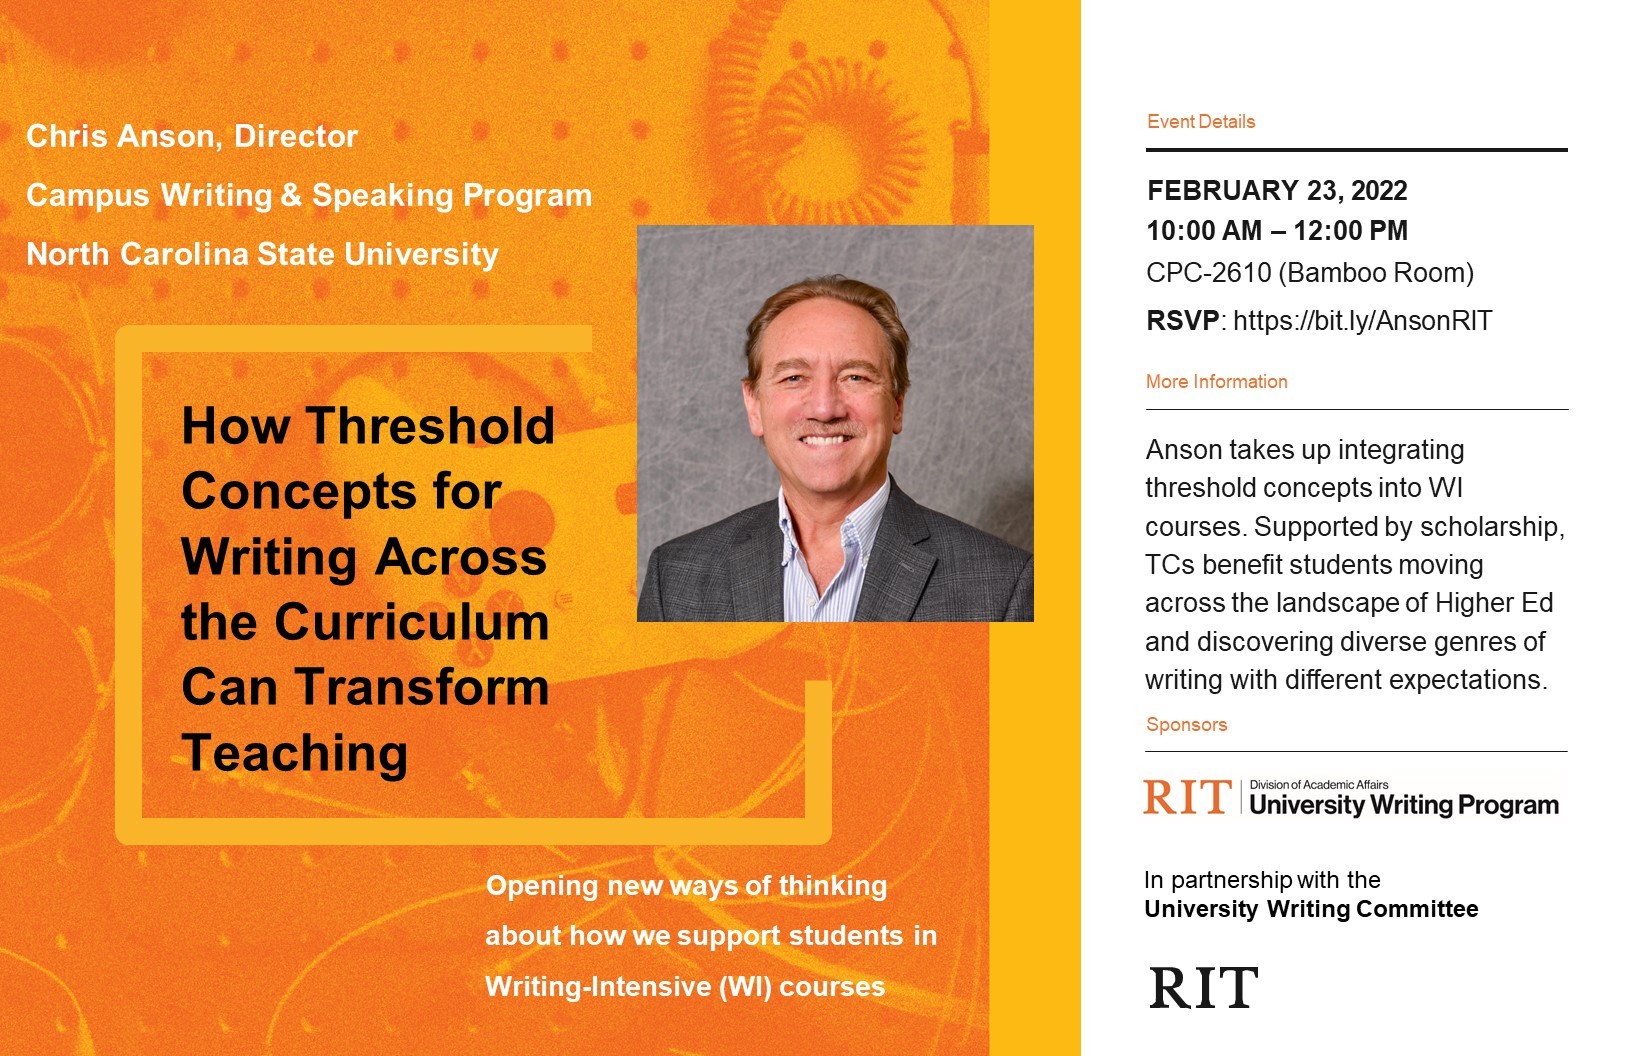 Event Poster. Title of Event Chris Anson, How Threshold Concepts for Writing Across the Curriculum Can Transform Teaching. Wednesday, Feb. 23 10 am to 12 pm. RSVP at https://bit.ly/AnsonRIT